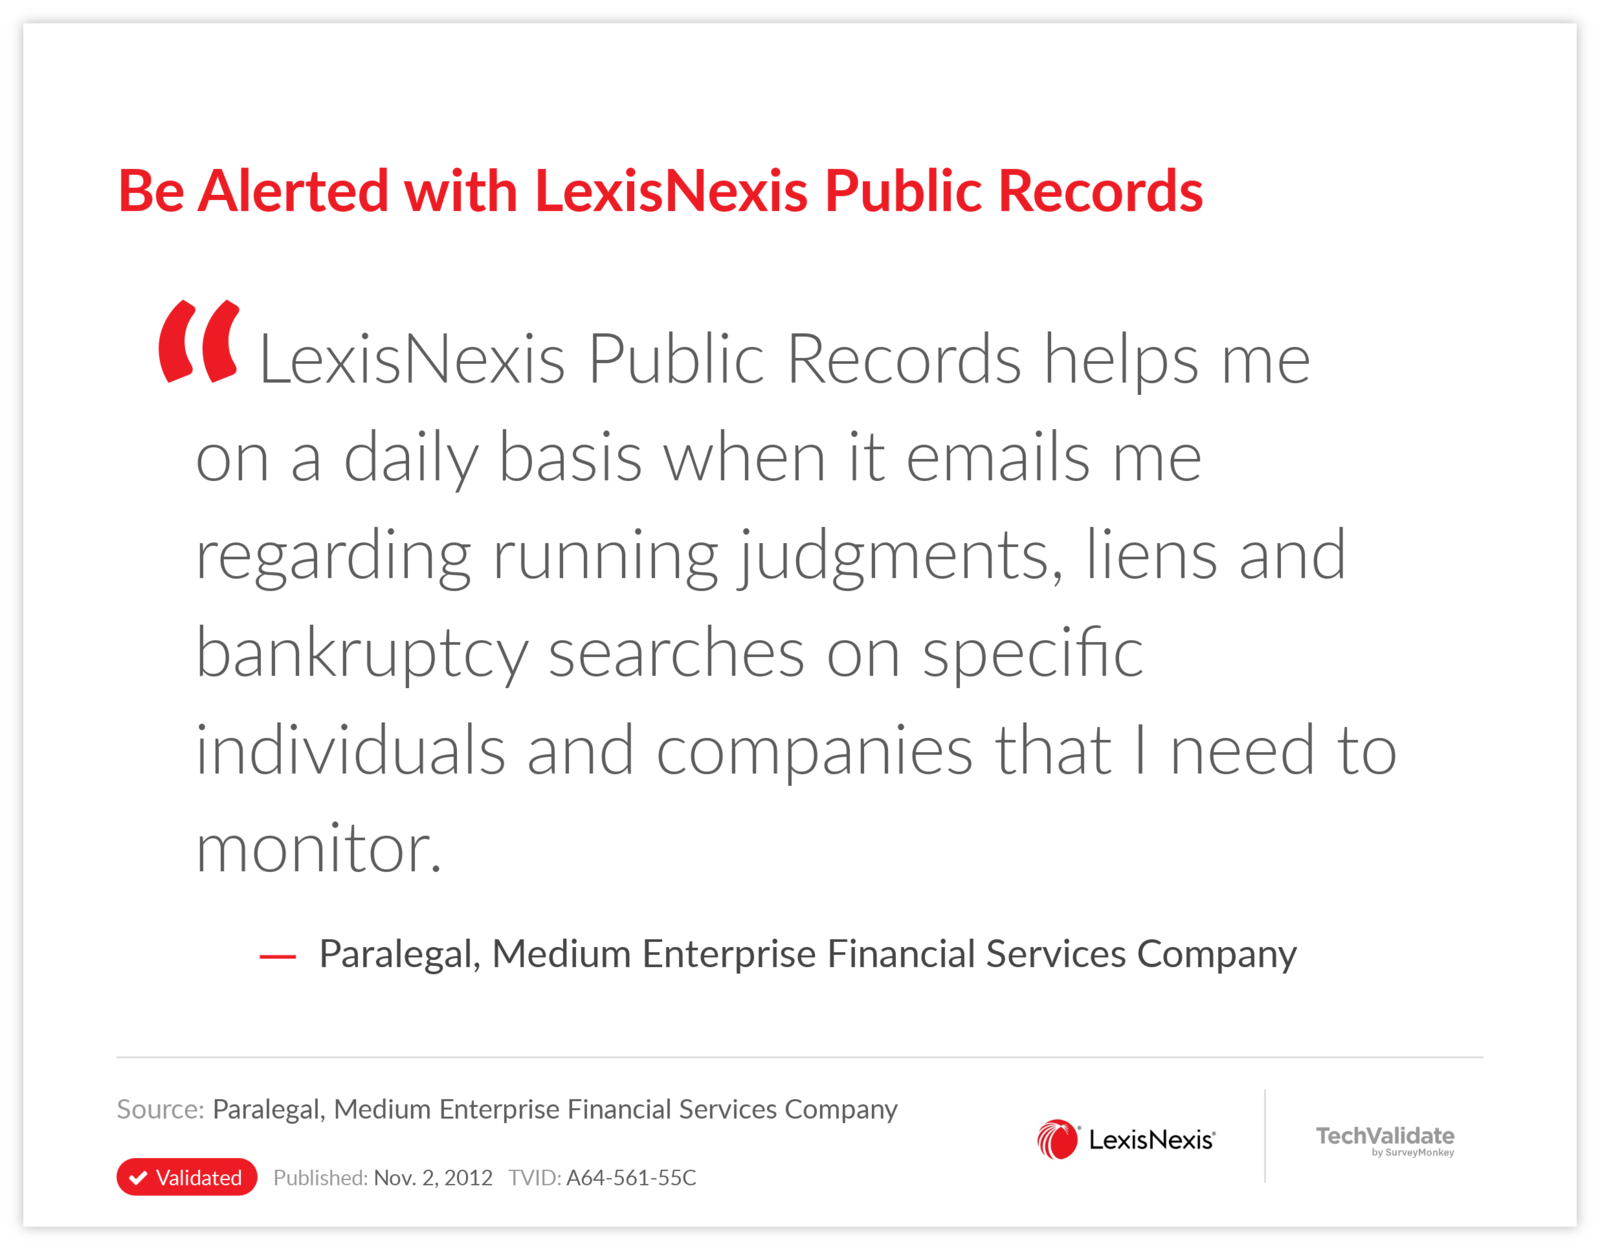 Be Alerted with LexisNexis Public Records